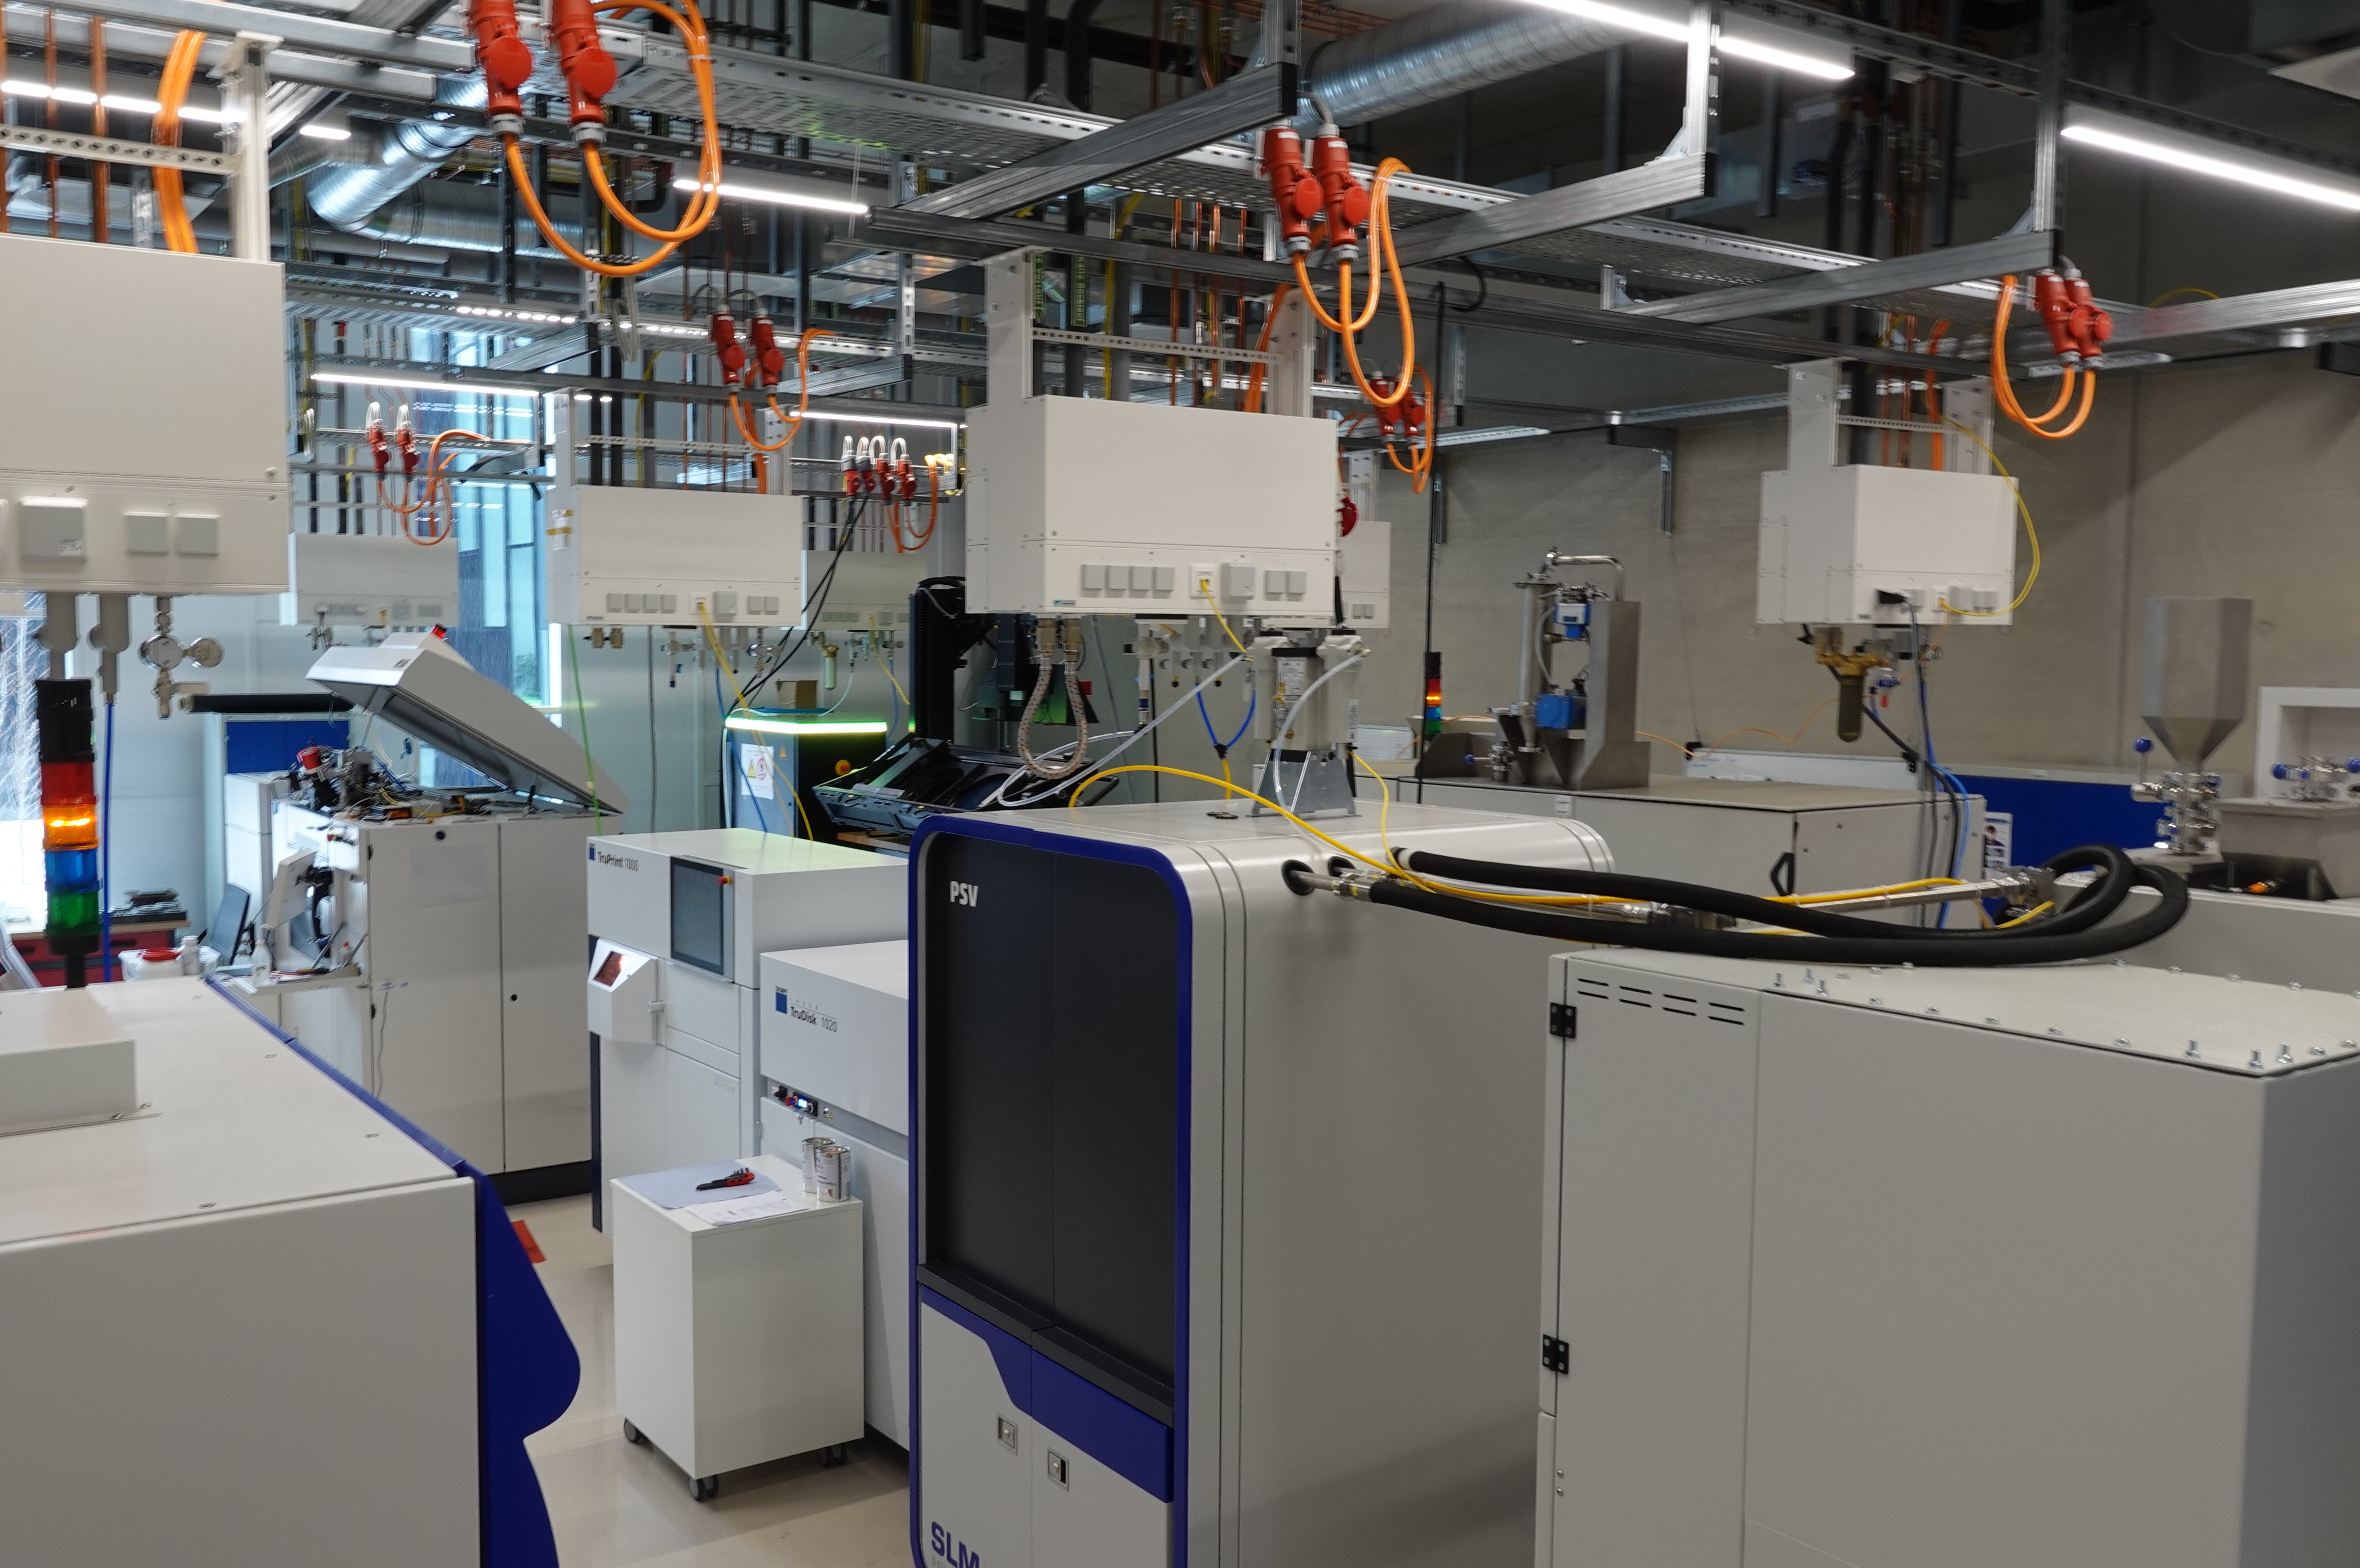 The Additive Manufacturing Laboratory (AMLab) is a cooperation between Fraunhofer IGCV and the Institute for Machine Tools and Industrial Management (iwb) at the TU Munich